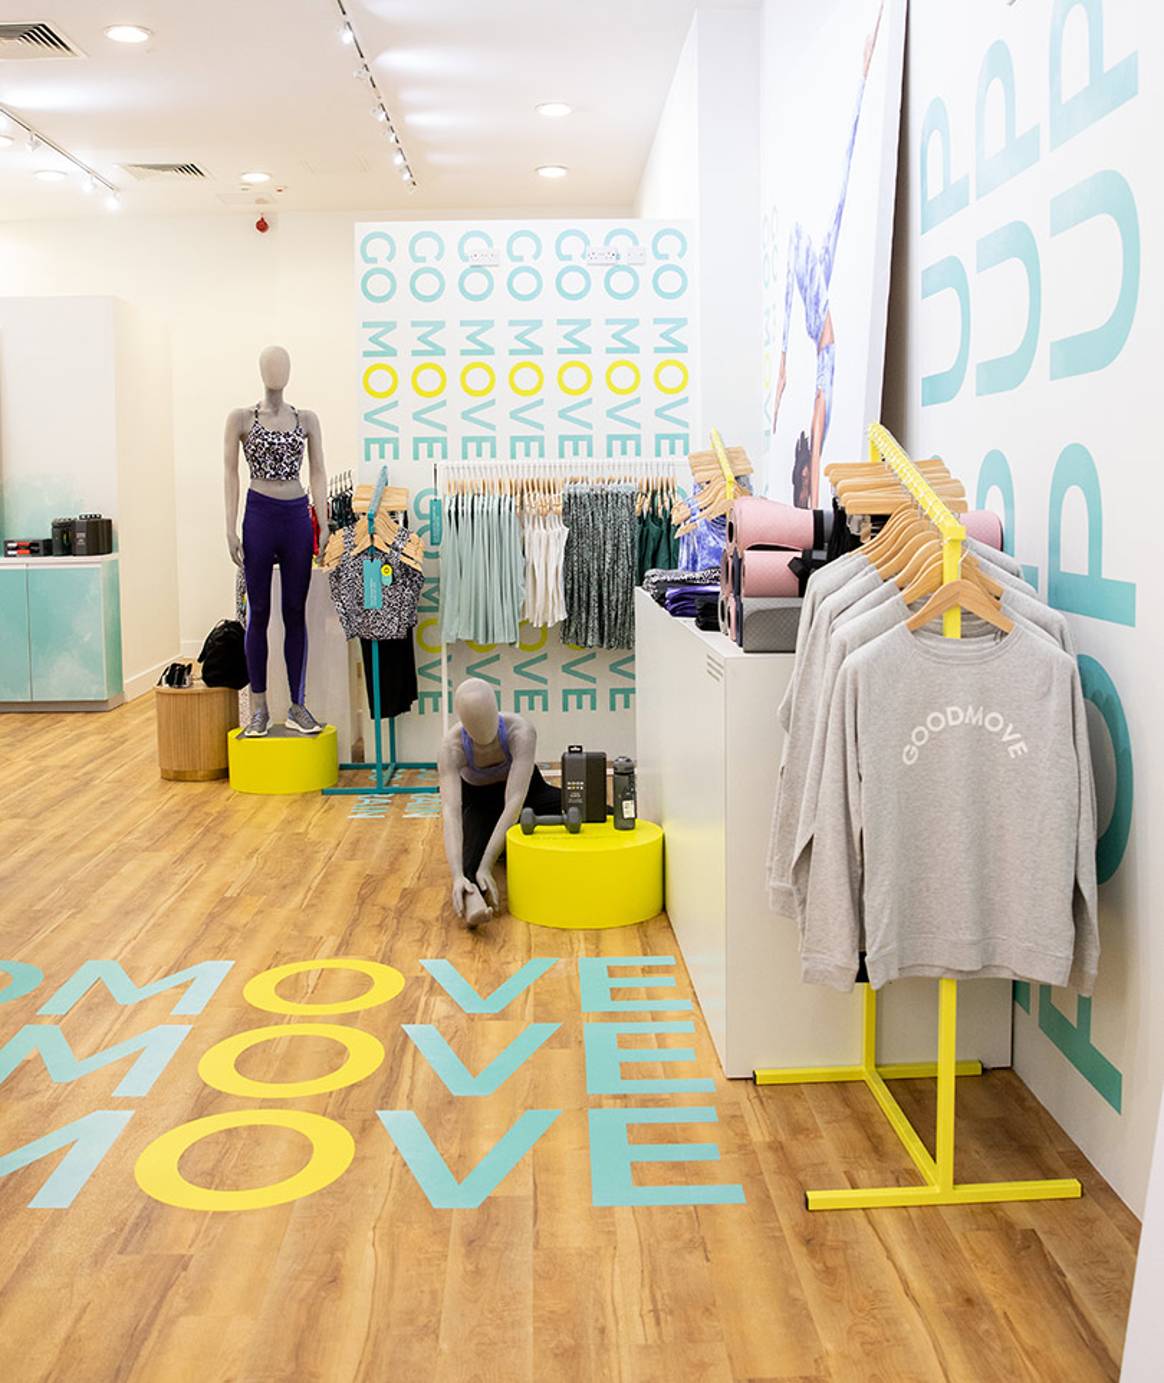 M&S to open Goodmove pop-up in London